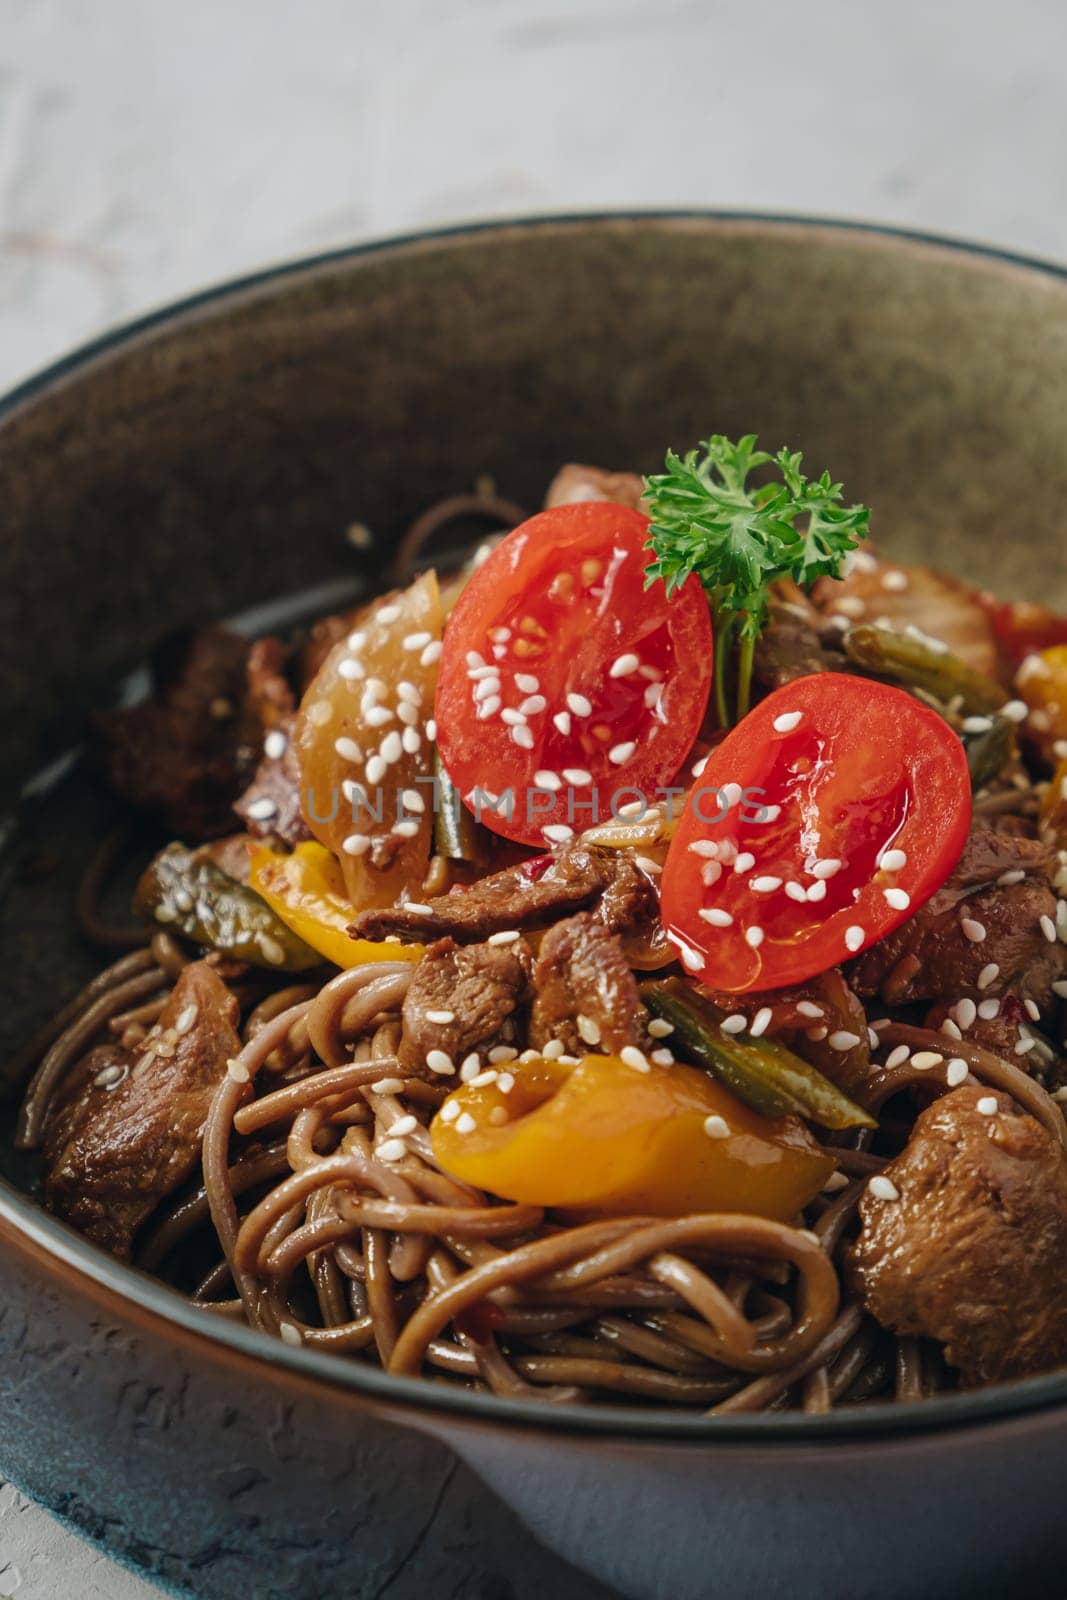 noodles with beef, vegetables, cherry tomatoes and sesame sauce